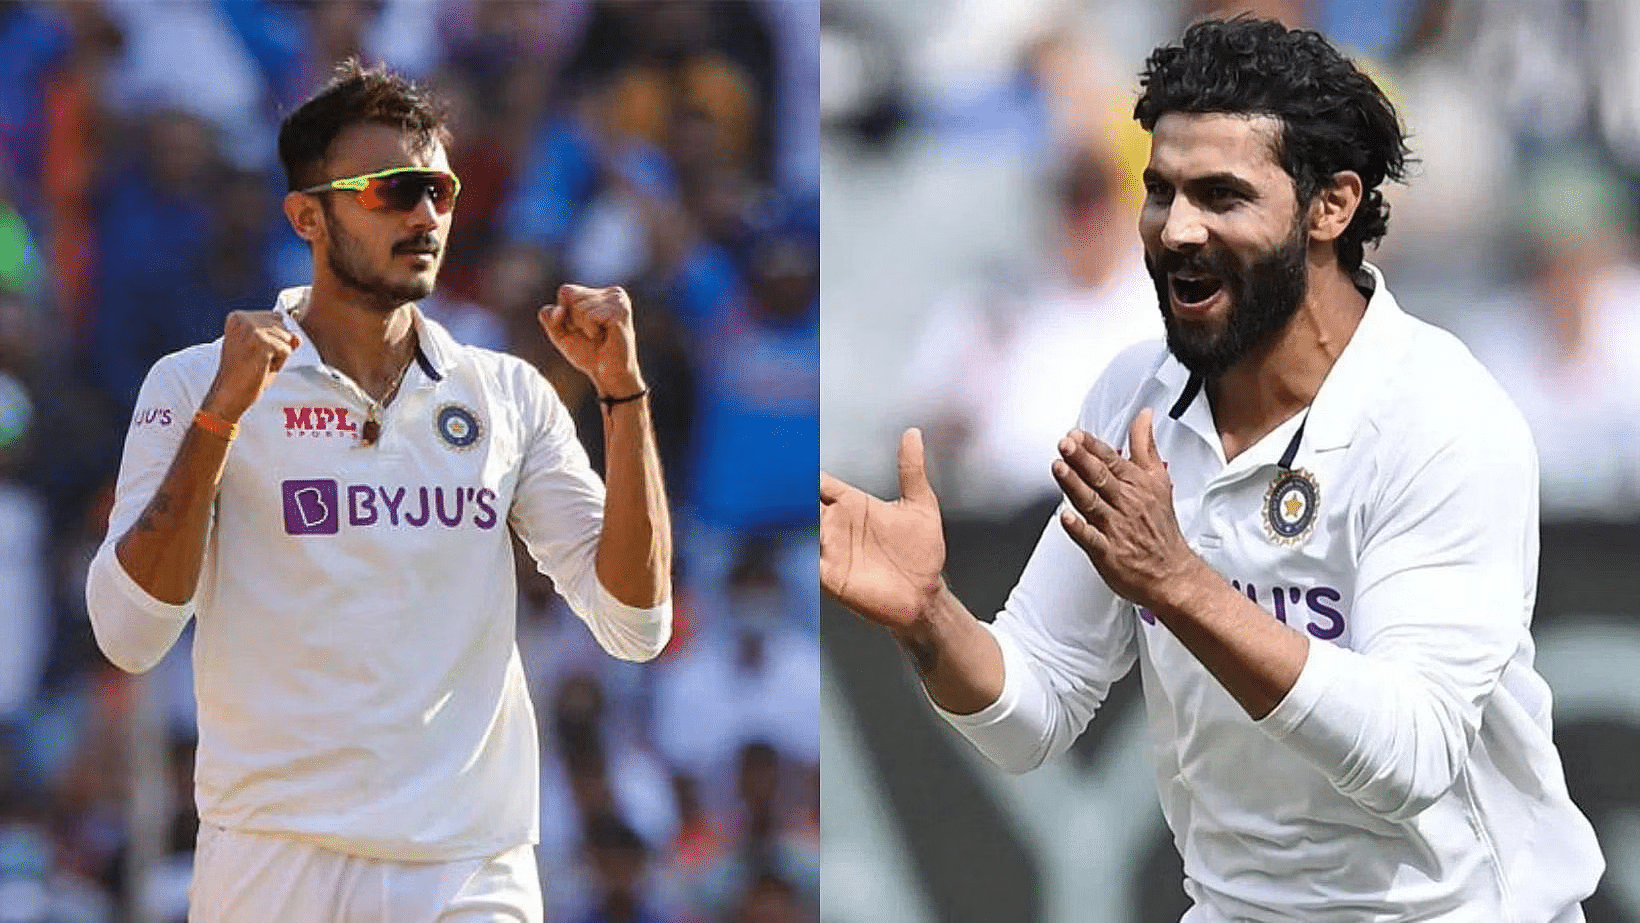 Axar Patel and Ravindra Jadeja will be key for India to extract massive turn from the dry areas on the pitch against the Australian left-handed batsmen